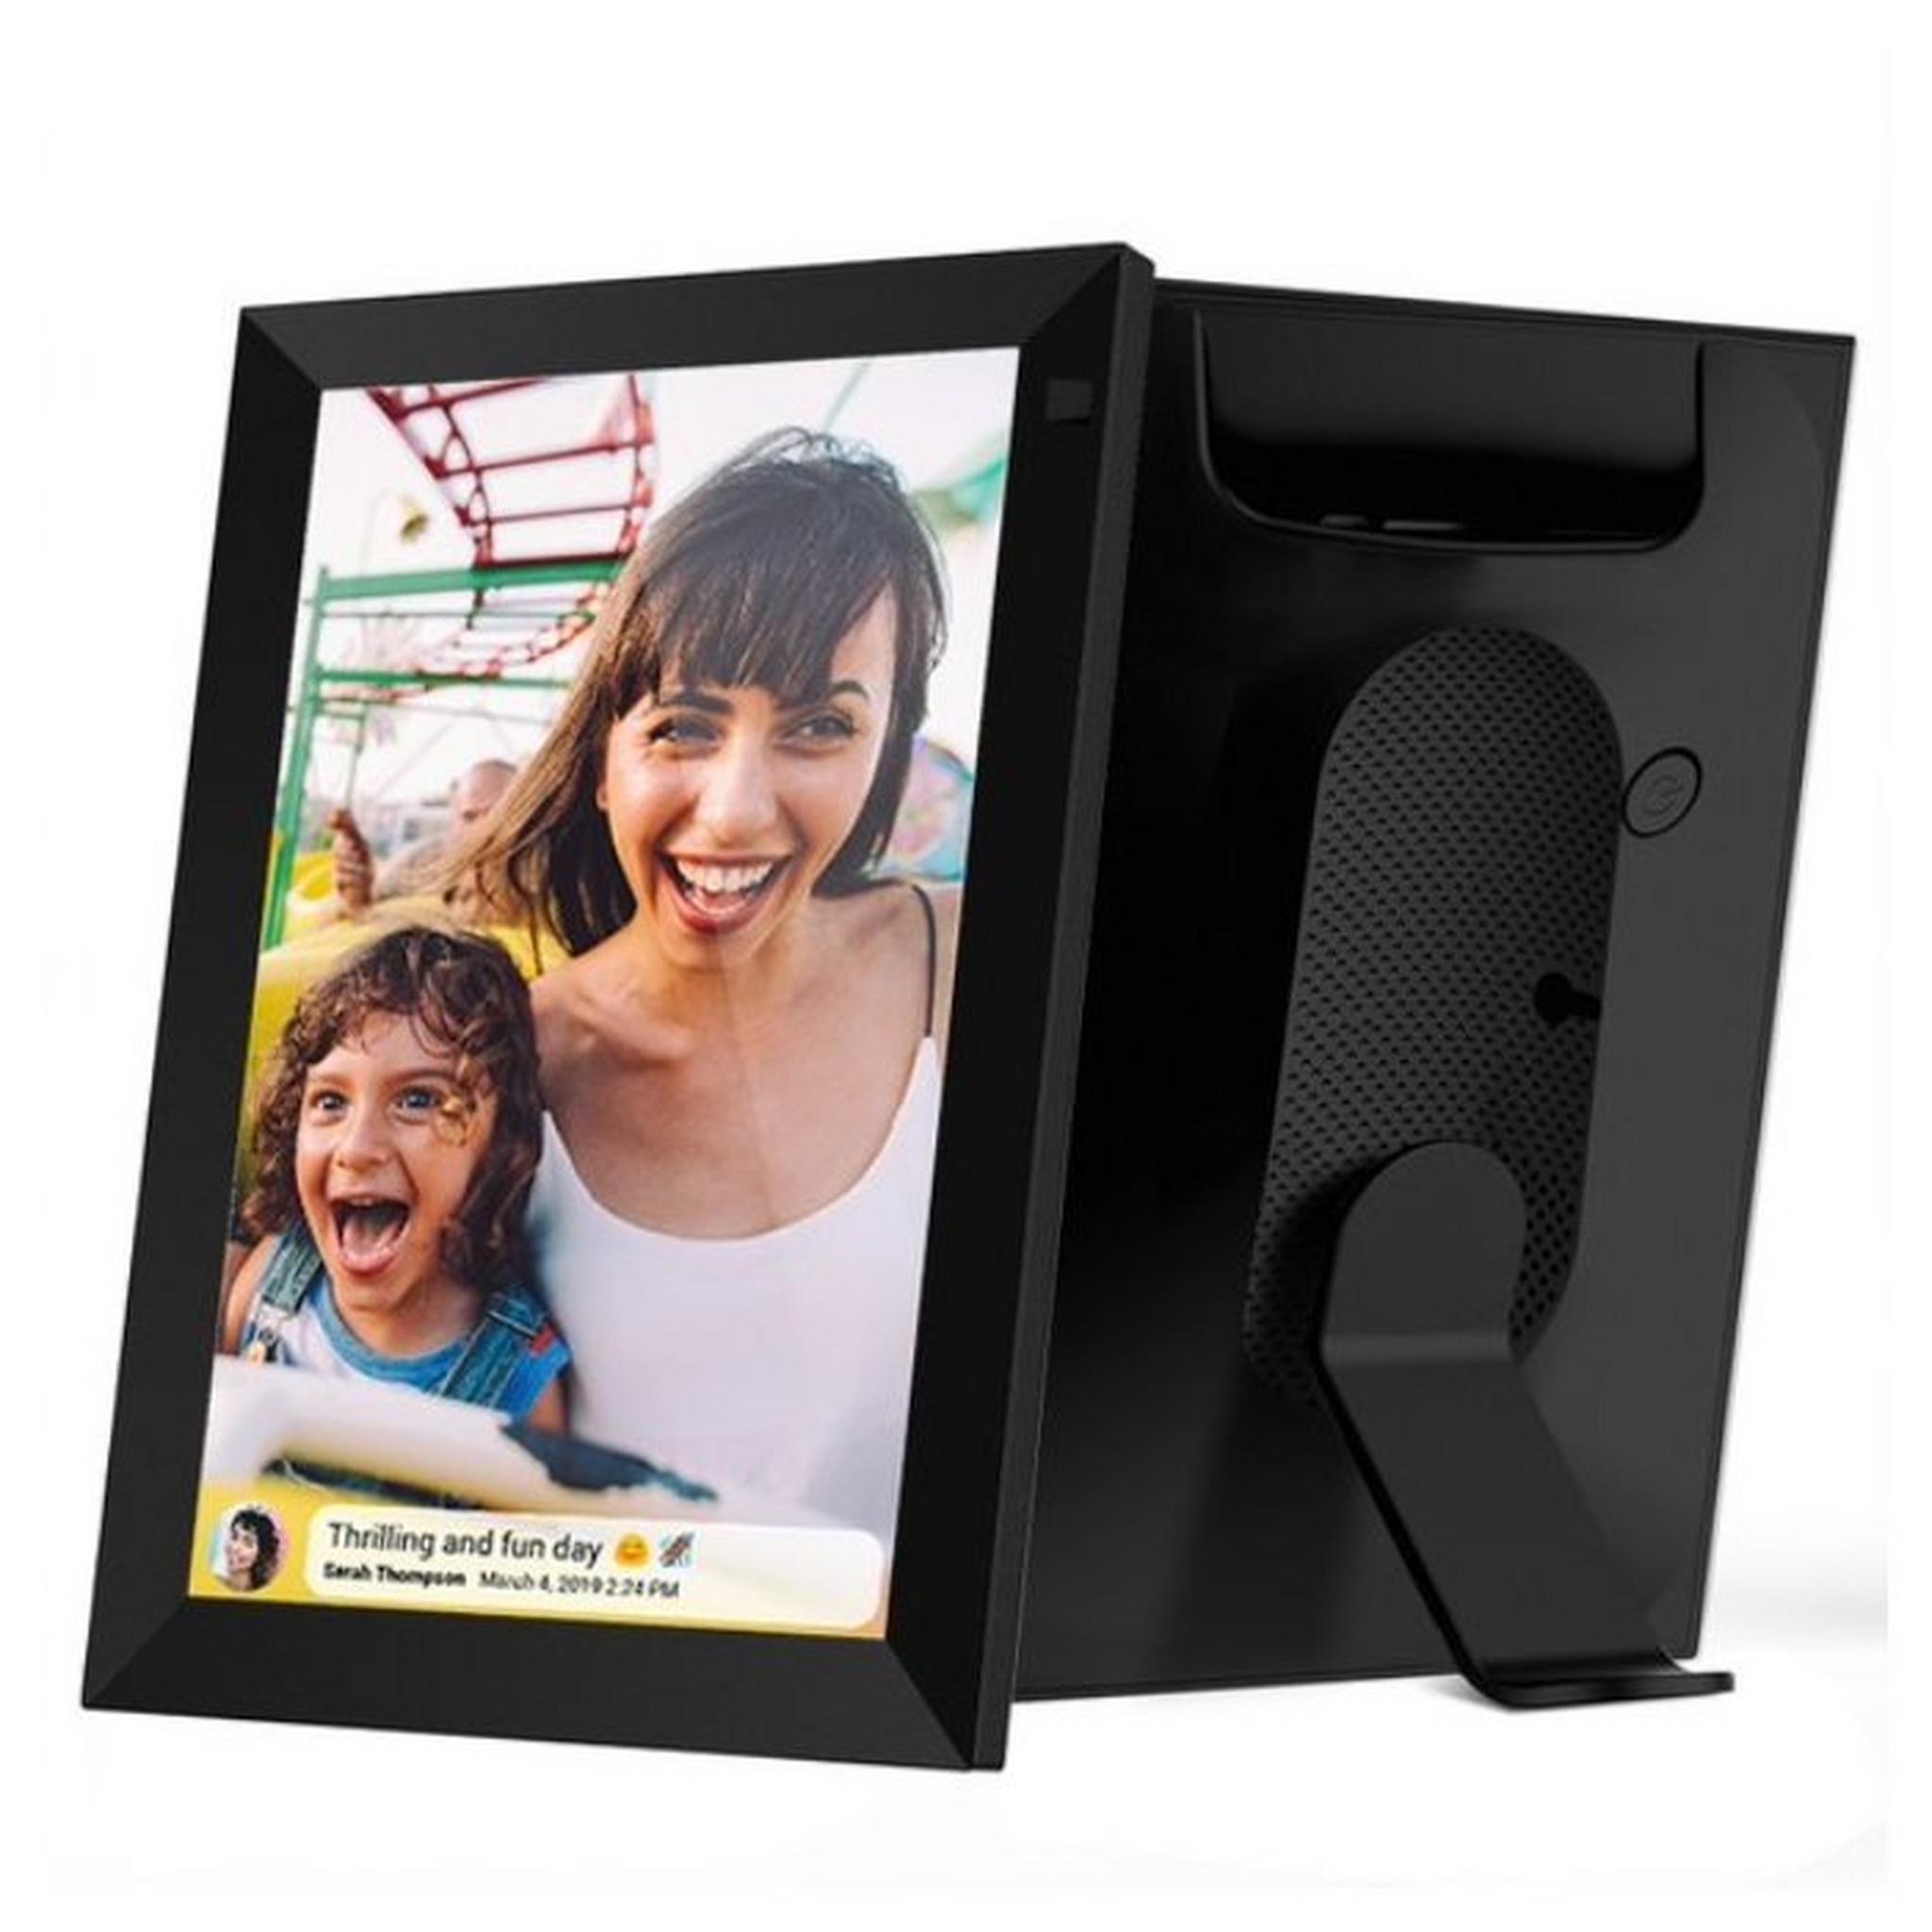 Frameo 16GB 8-inch Touch Photo Frame - Black